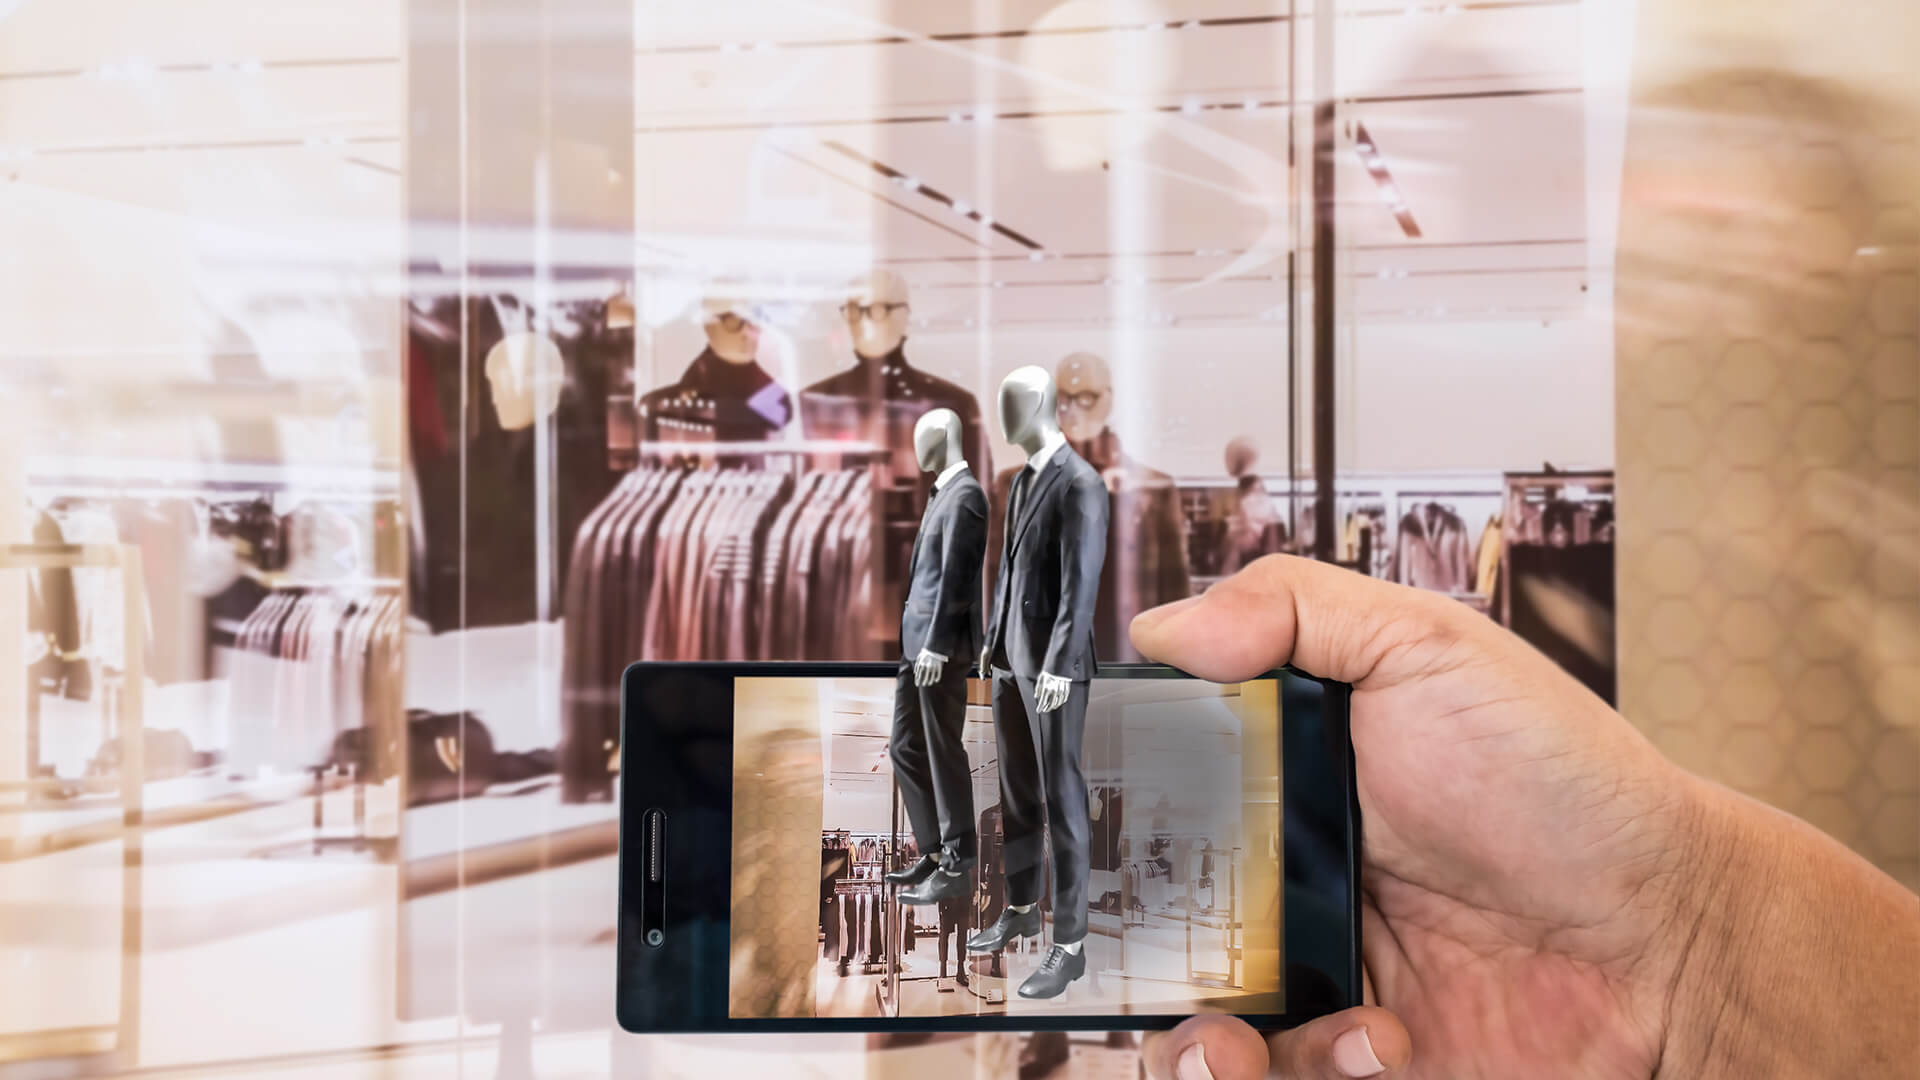 Smartphone being held with mannequins coming out of it and a clothes shop window in the background